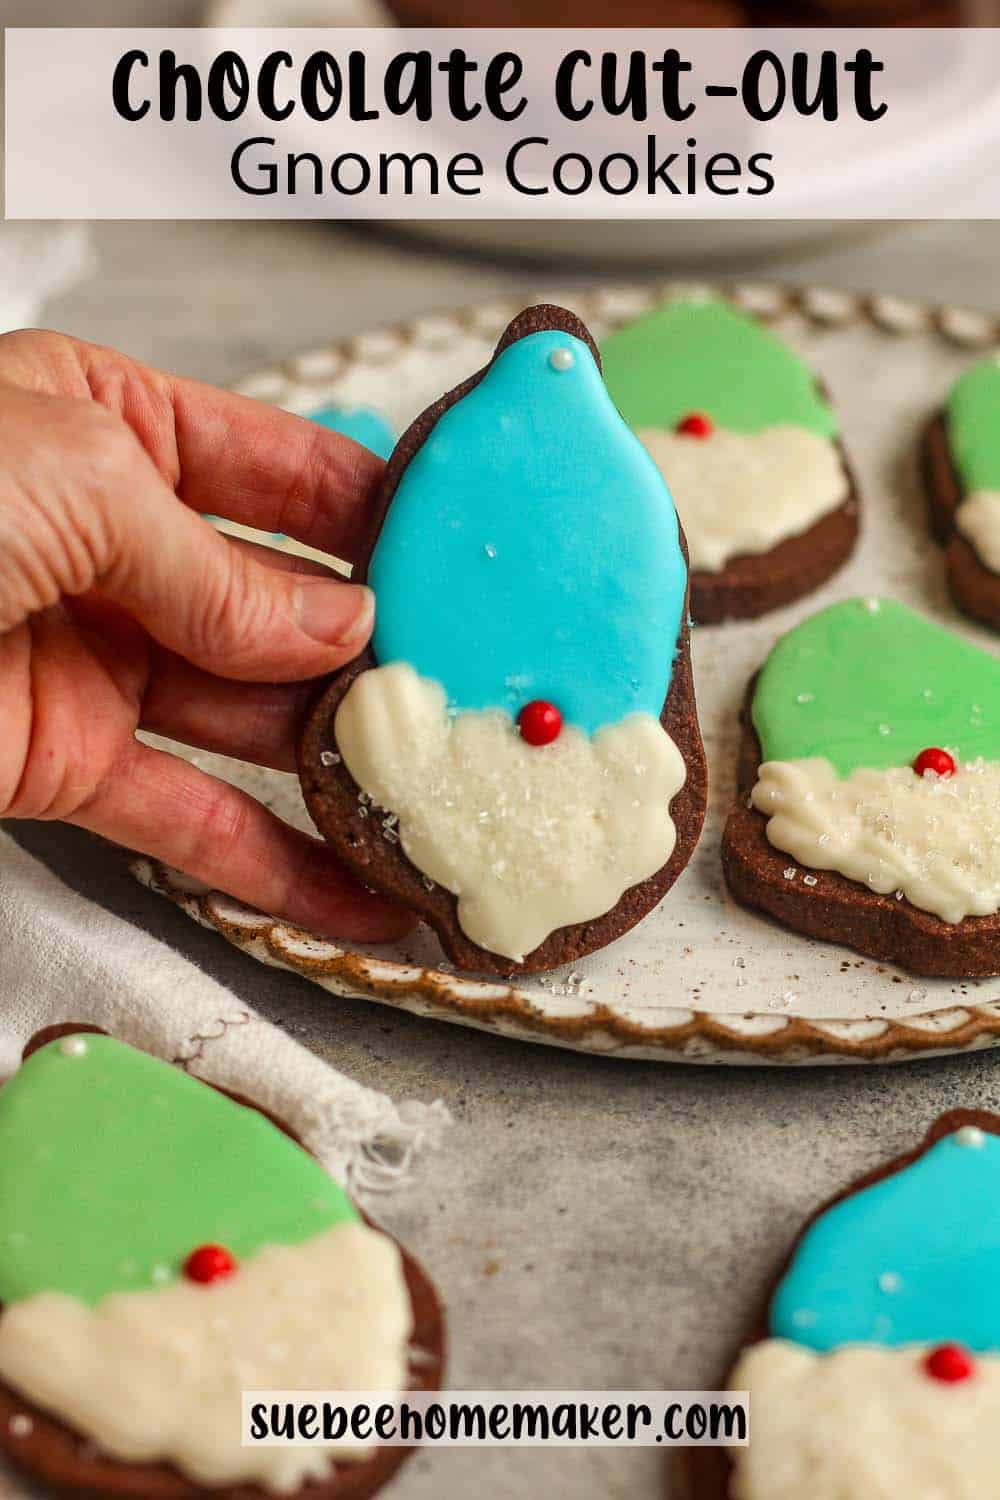 A hand holding a chocolate cut-out gnome cookies over a plate of cookies.